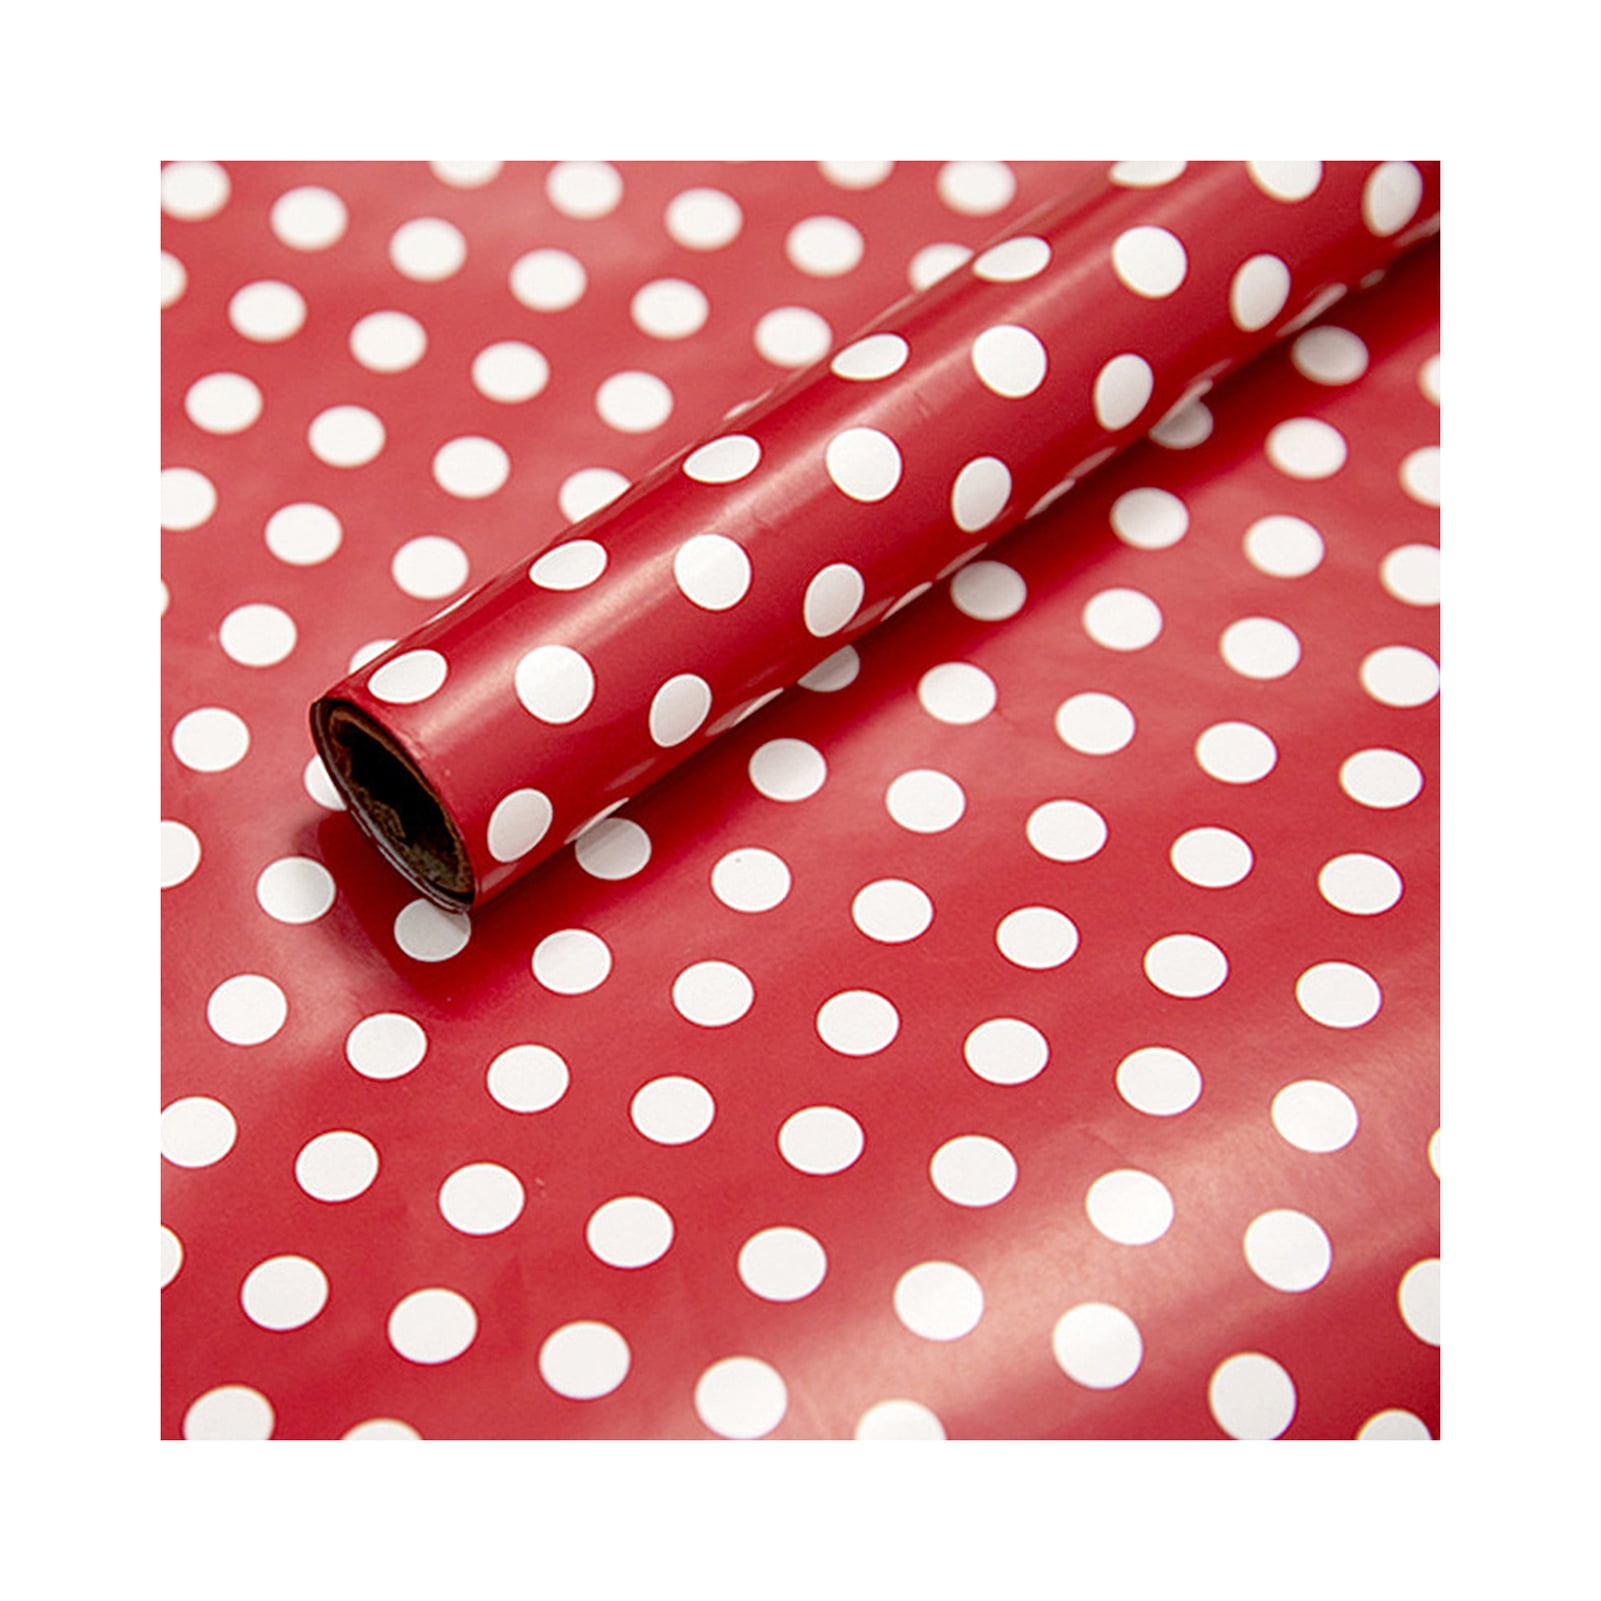 Vivid Raspberry Solid Color Wrapping Paper